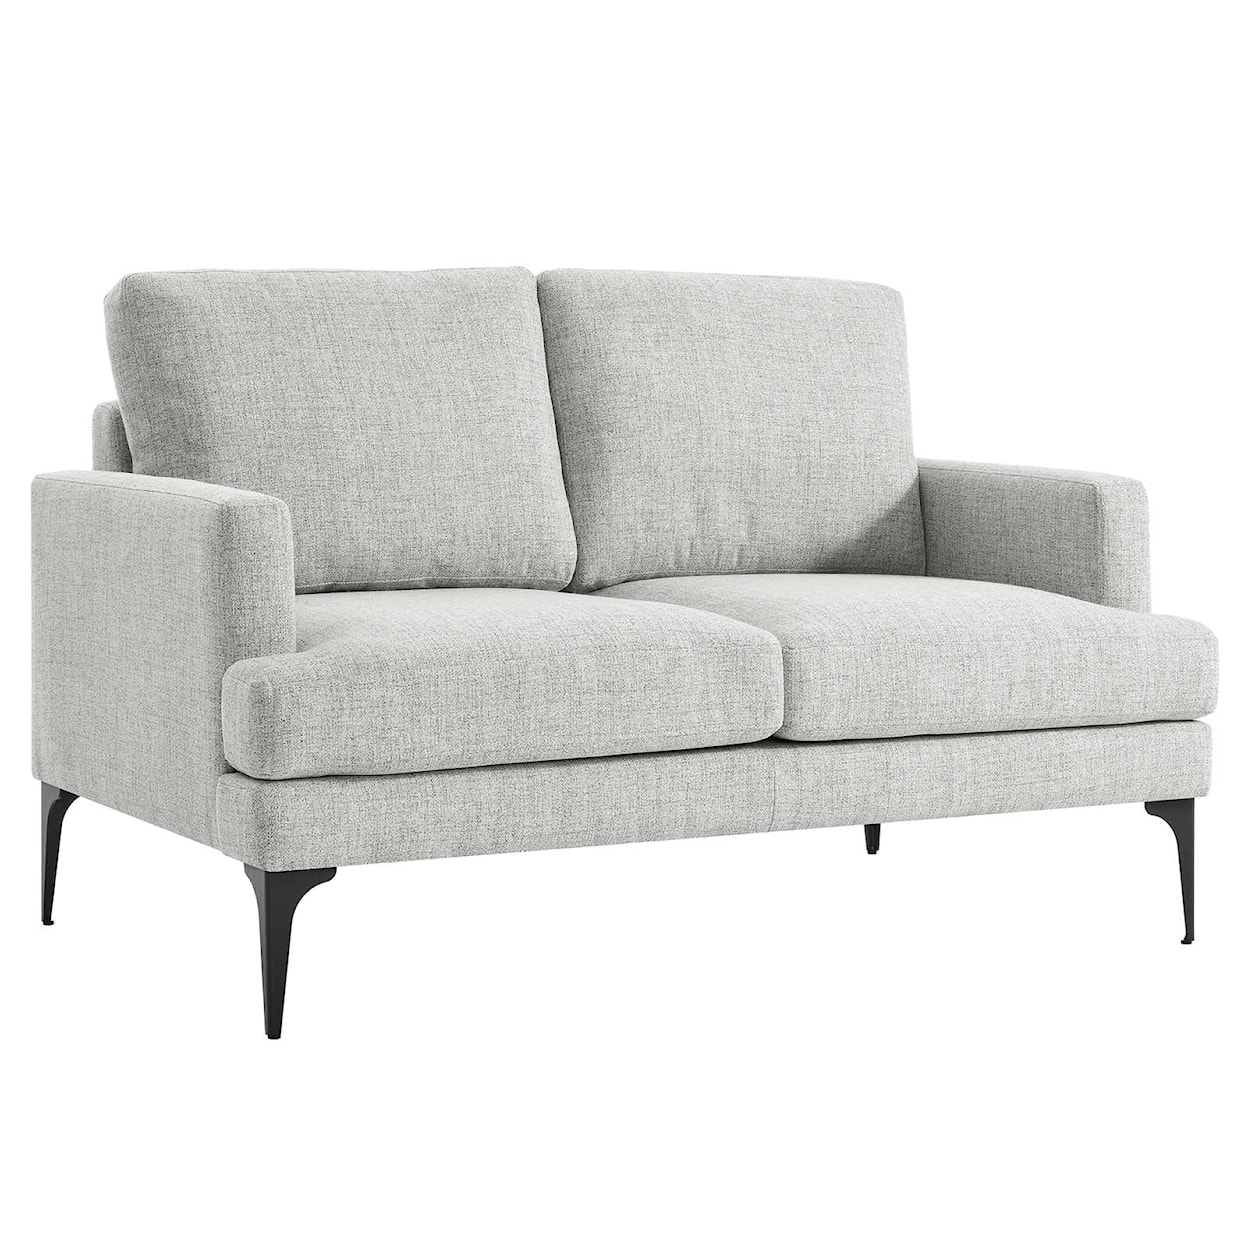 Modway Evermore Two-Seater Loveseat